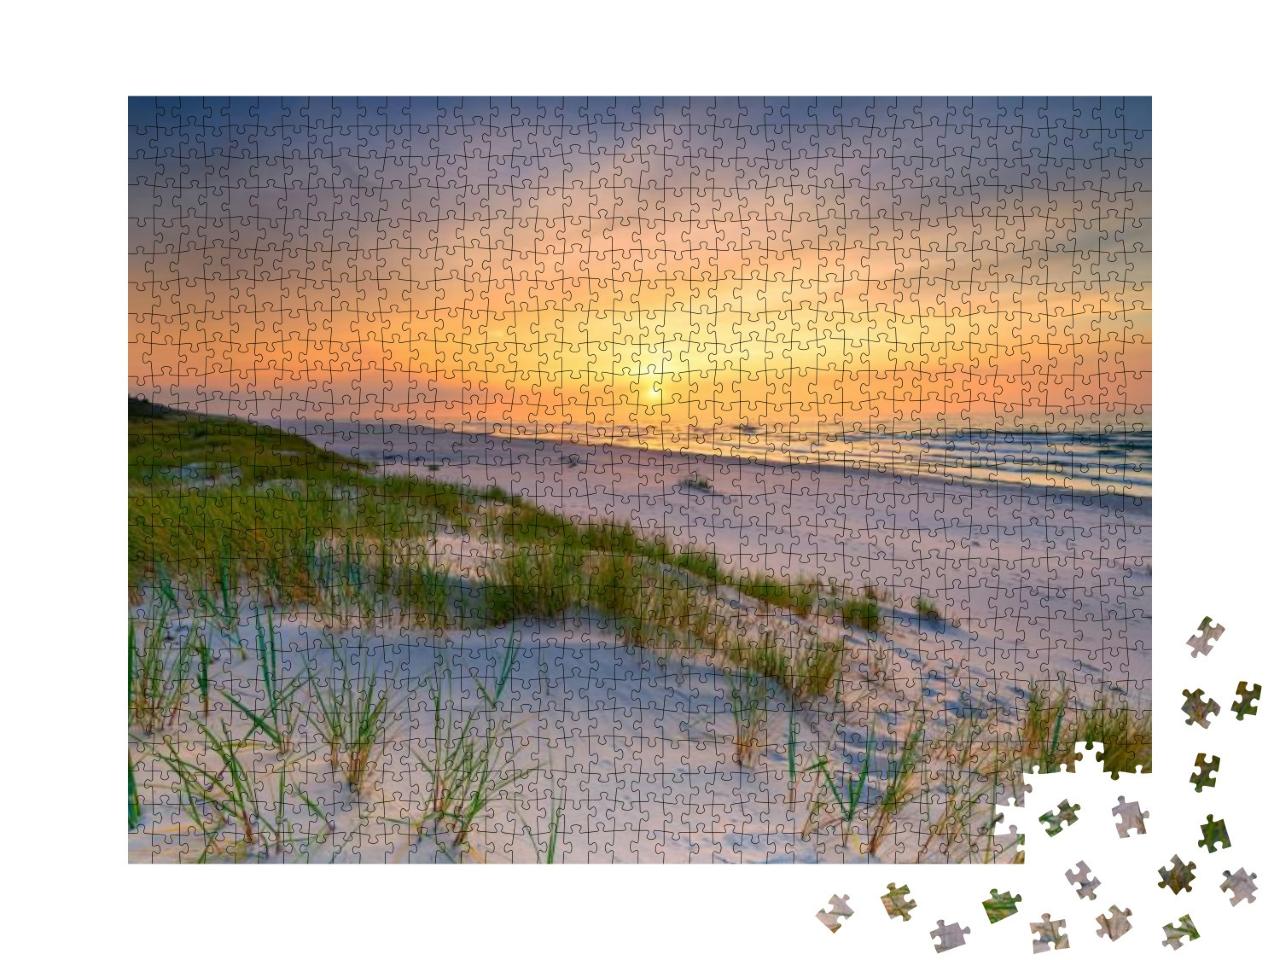 Beautiful Summer Sunset Over Beach At Baltic Sea... Jigsaw Puzzle with 1000 pieces